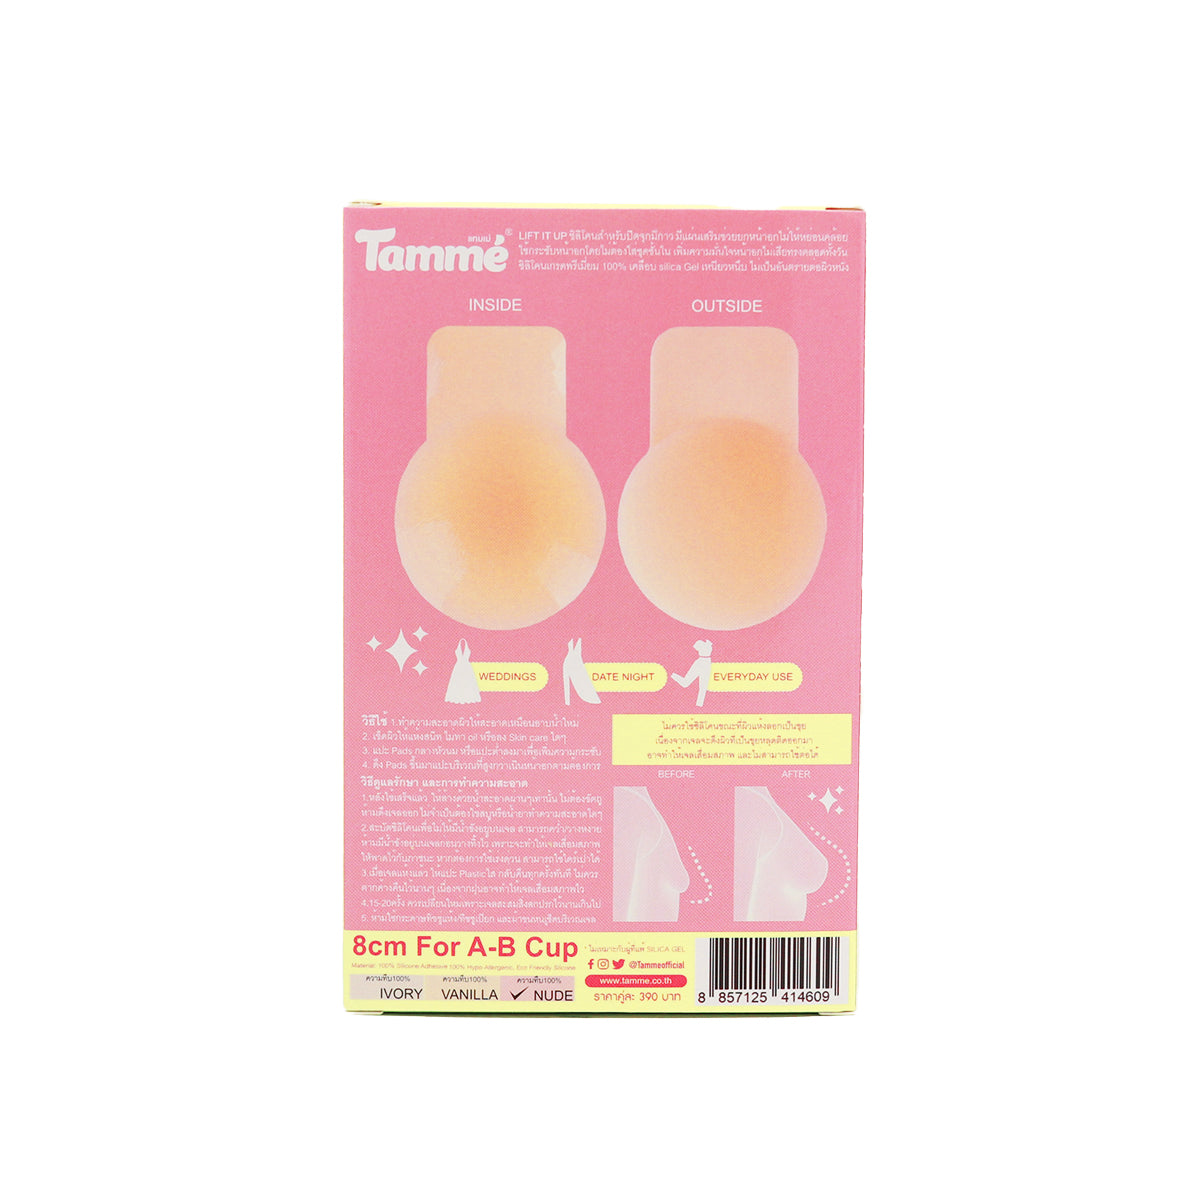 Tamme Lift it Up (Adhesive Nipple Covers)